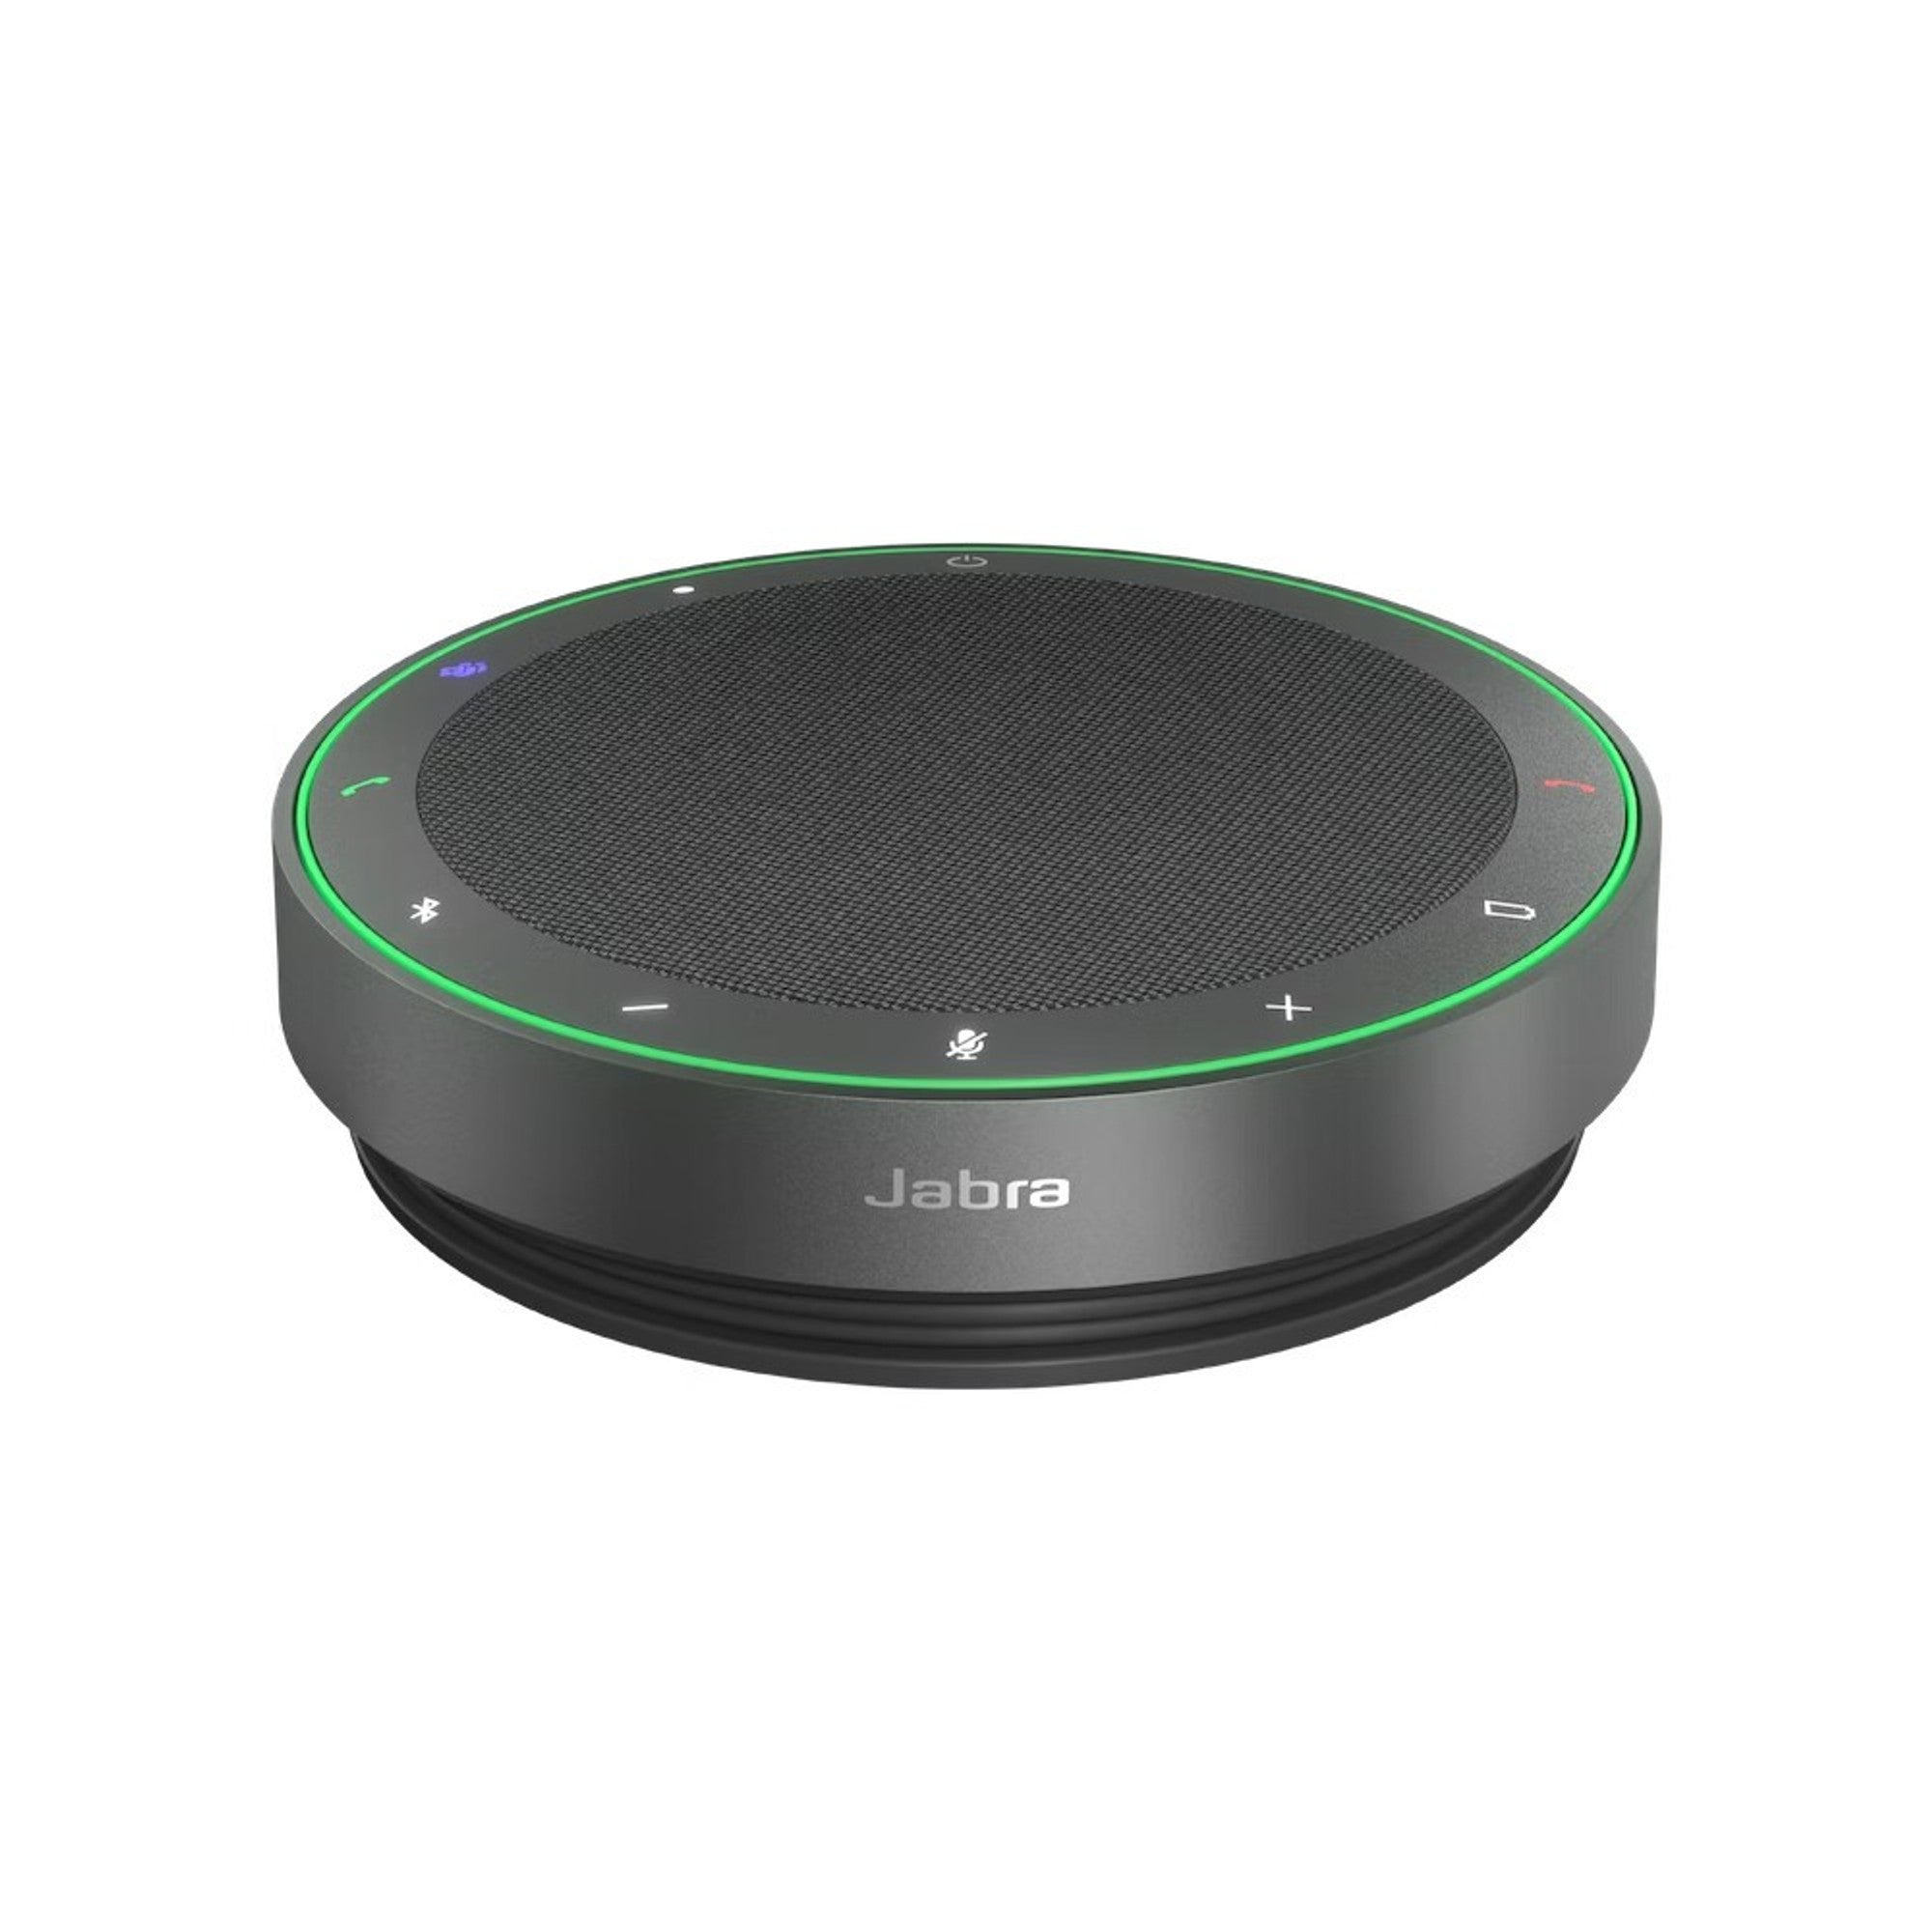 Jabra Speak2 75 MS Teams Speakerphone with Link 380 USB-A Adapter  2775-319 (2 Years Manufacture Local Warranty In Singapore)